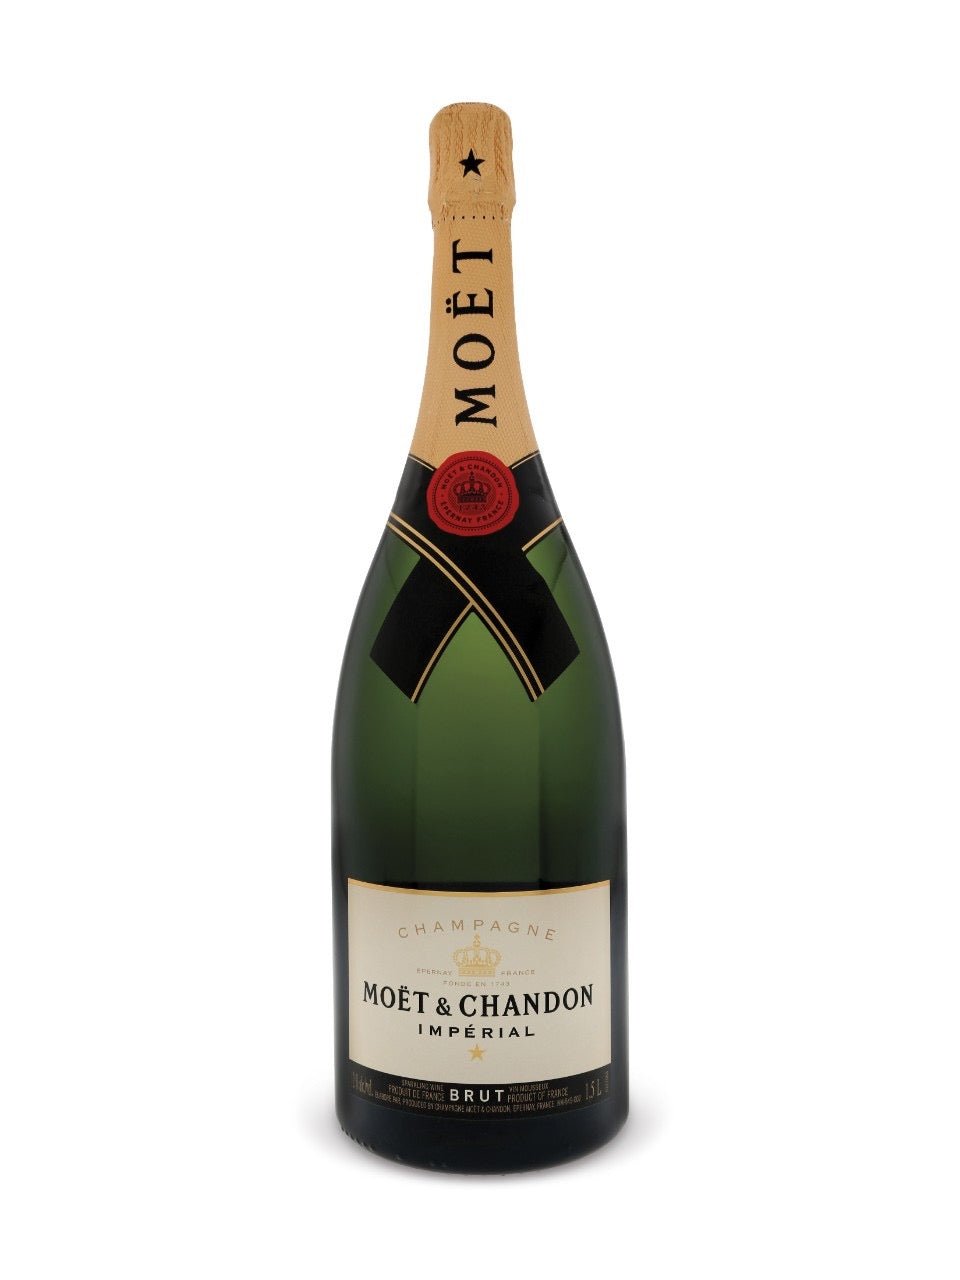 Moët & Chandon Brut Imperial Champagne 1.5L Magnum | Exquisite Wine & Alcohol Gift Delivery Toronto Canada | Vyno